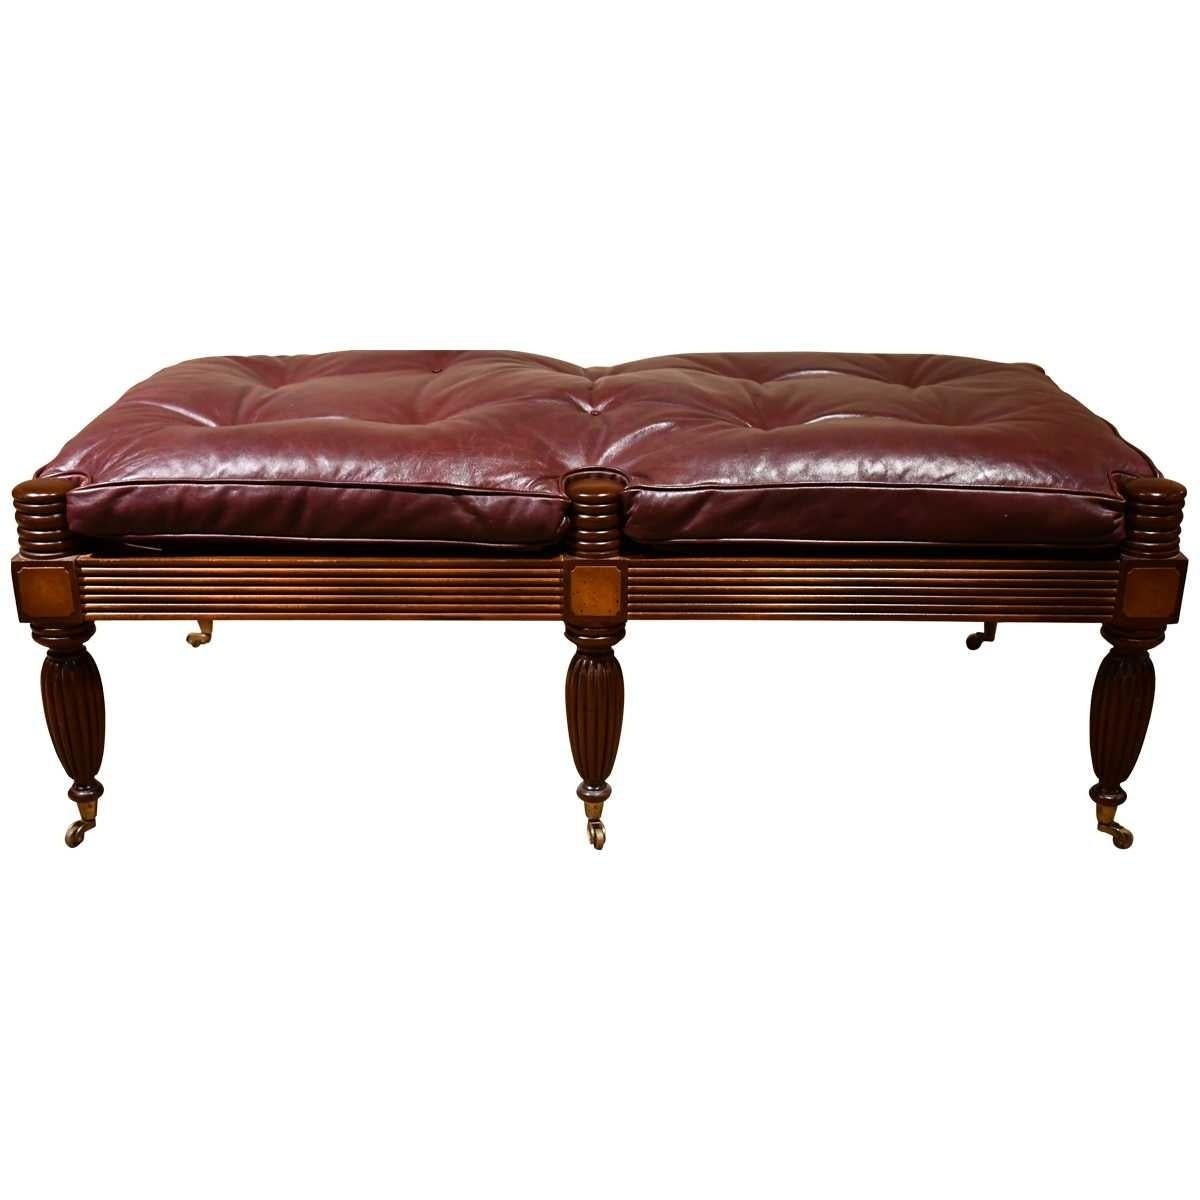 Attractive Regency Style Mahogany Bench with Button Tufted Leather Squab For Sale 1